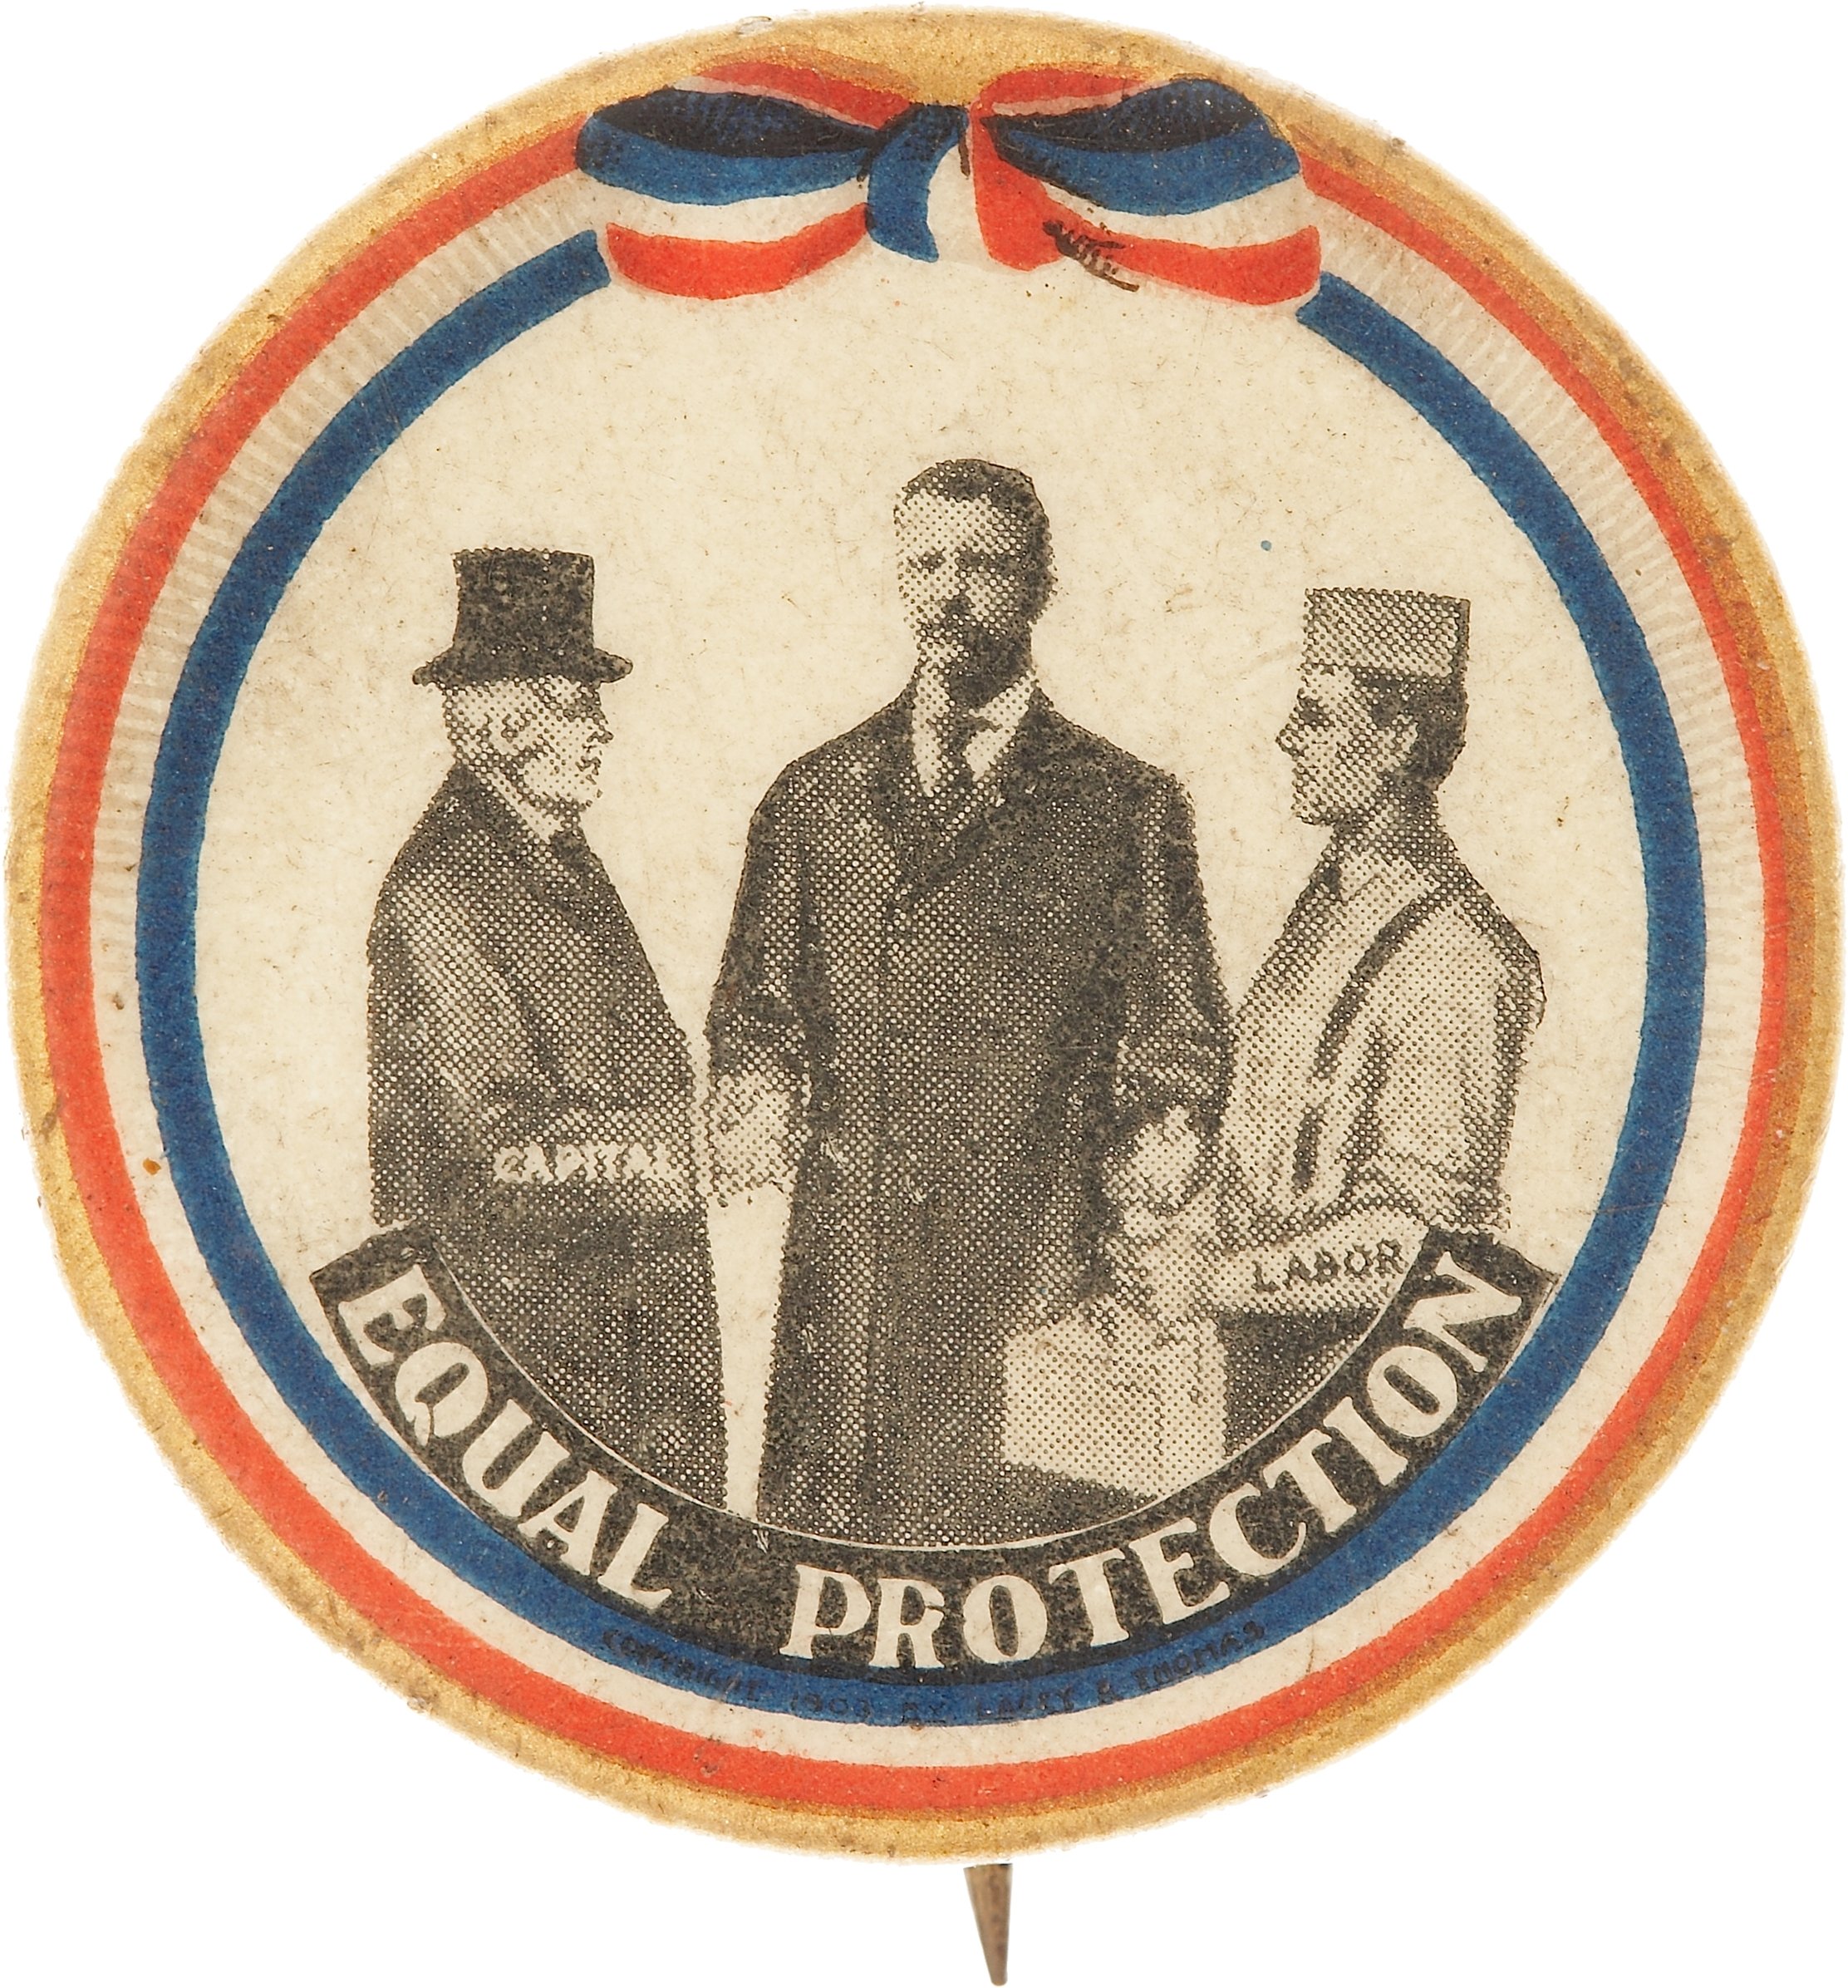 theodore-roosevelt-exceptionally-rare-type-of-equality-button